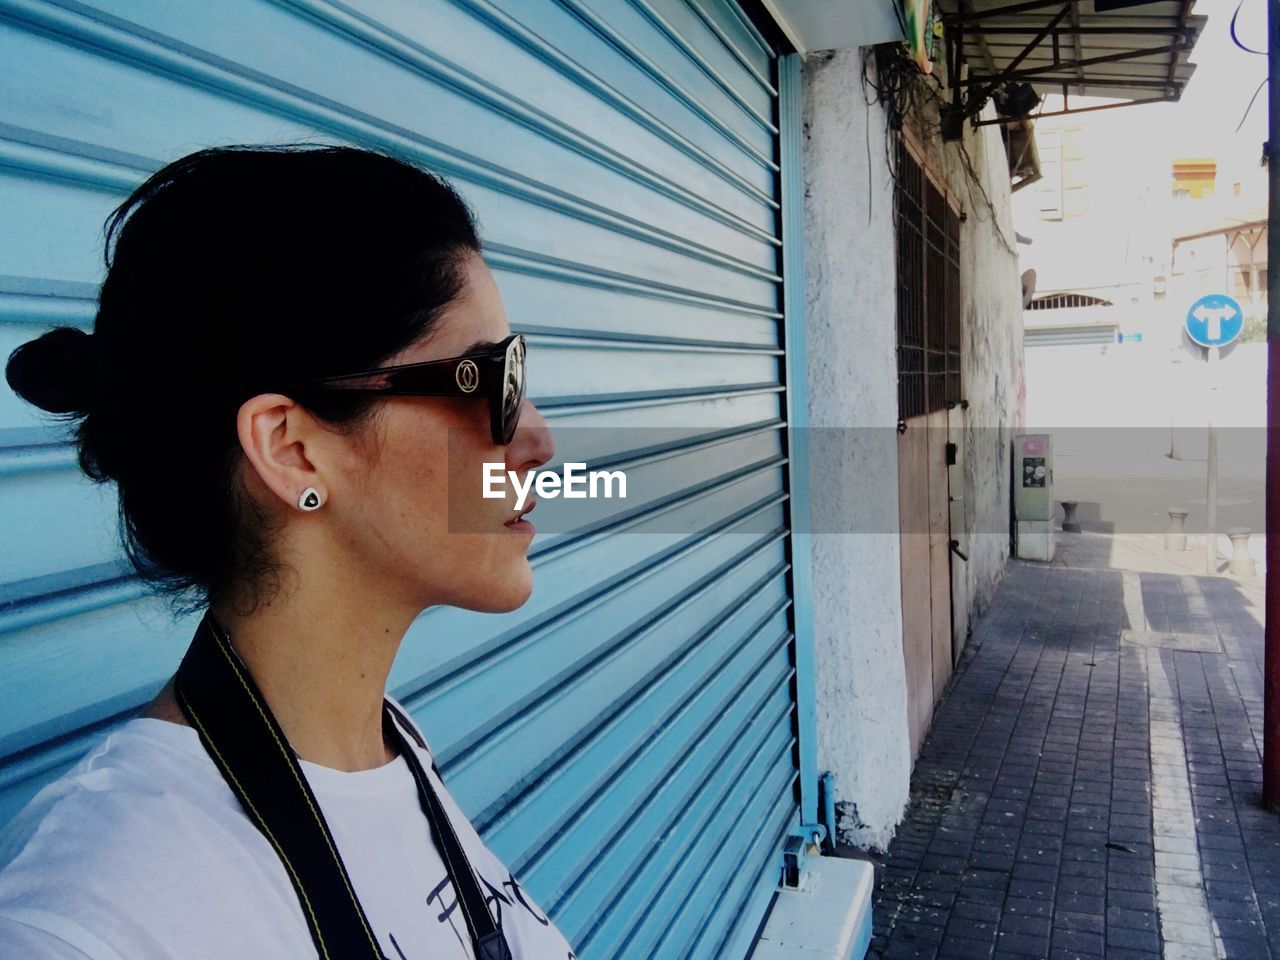 Woman in sunglasses standing against shutter